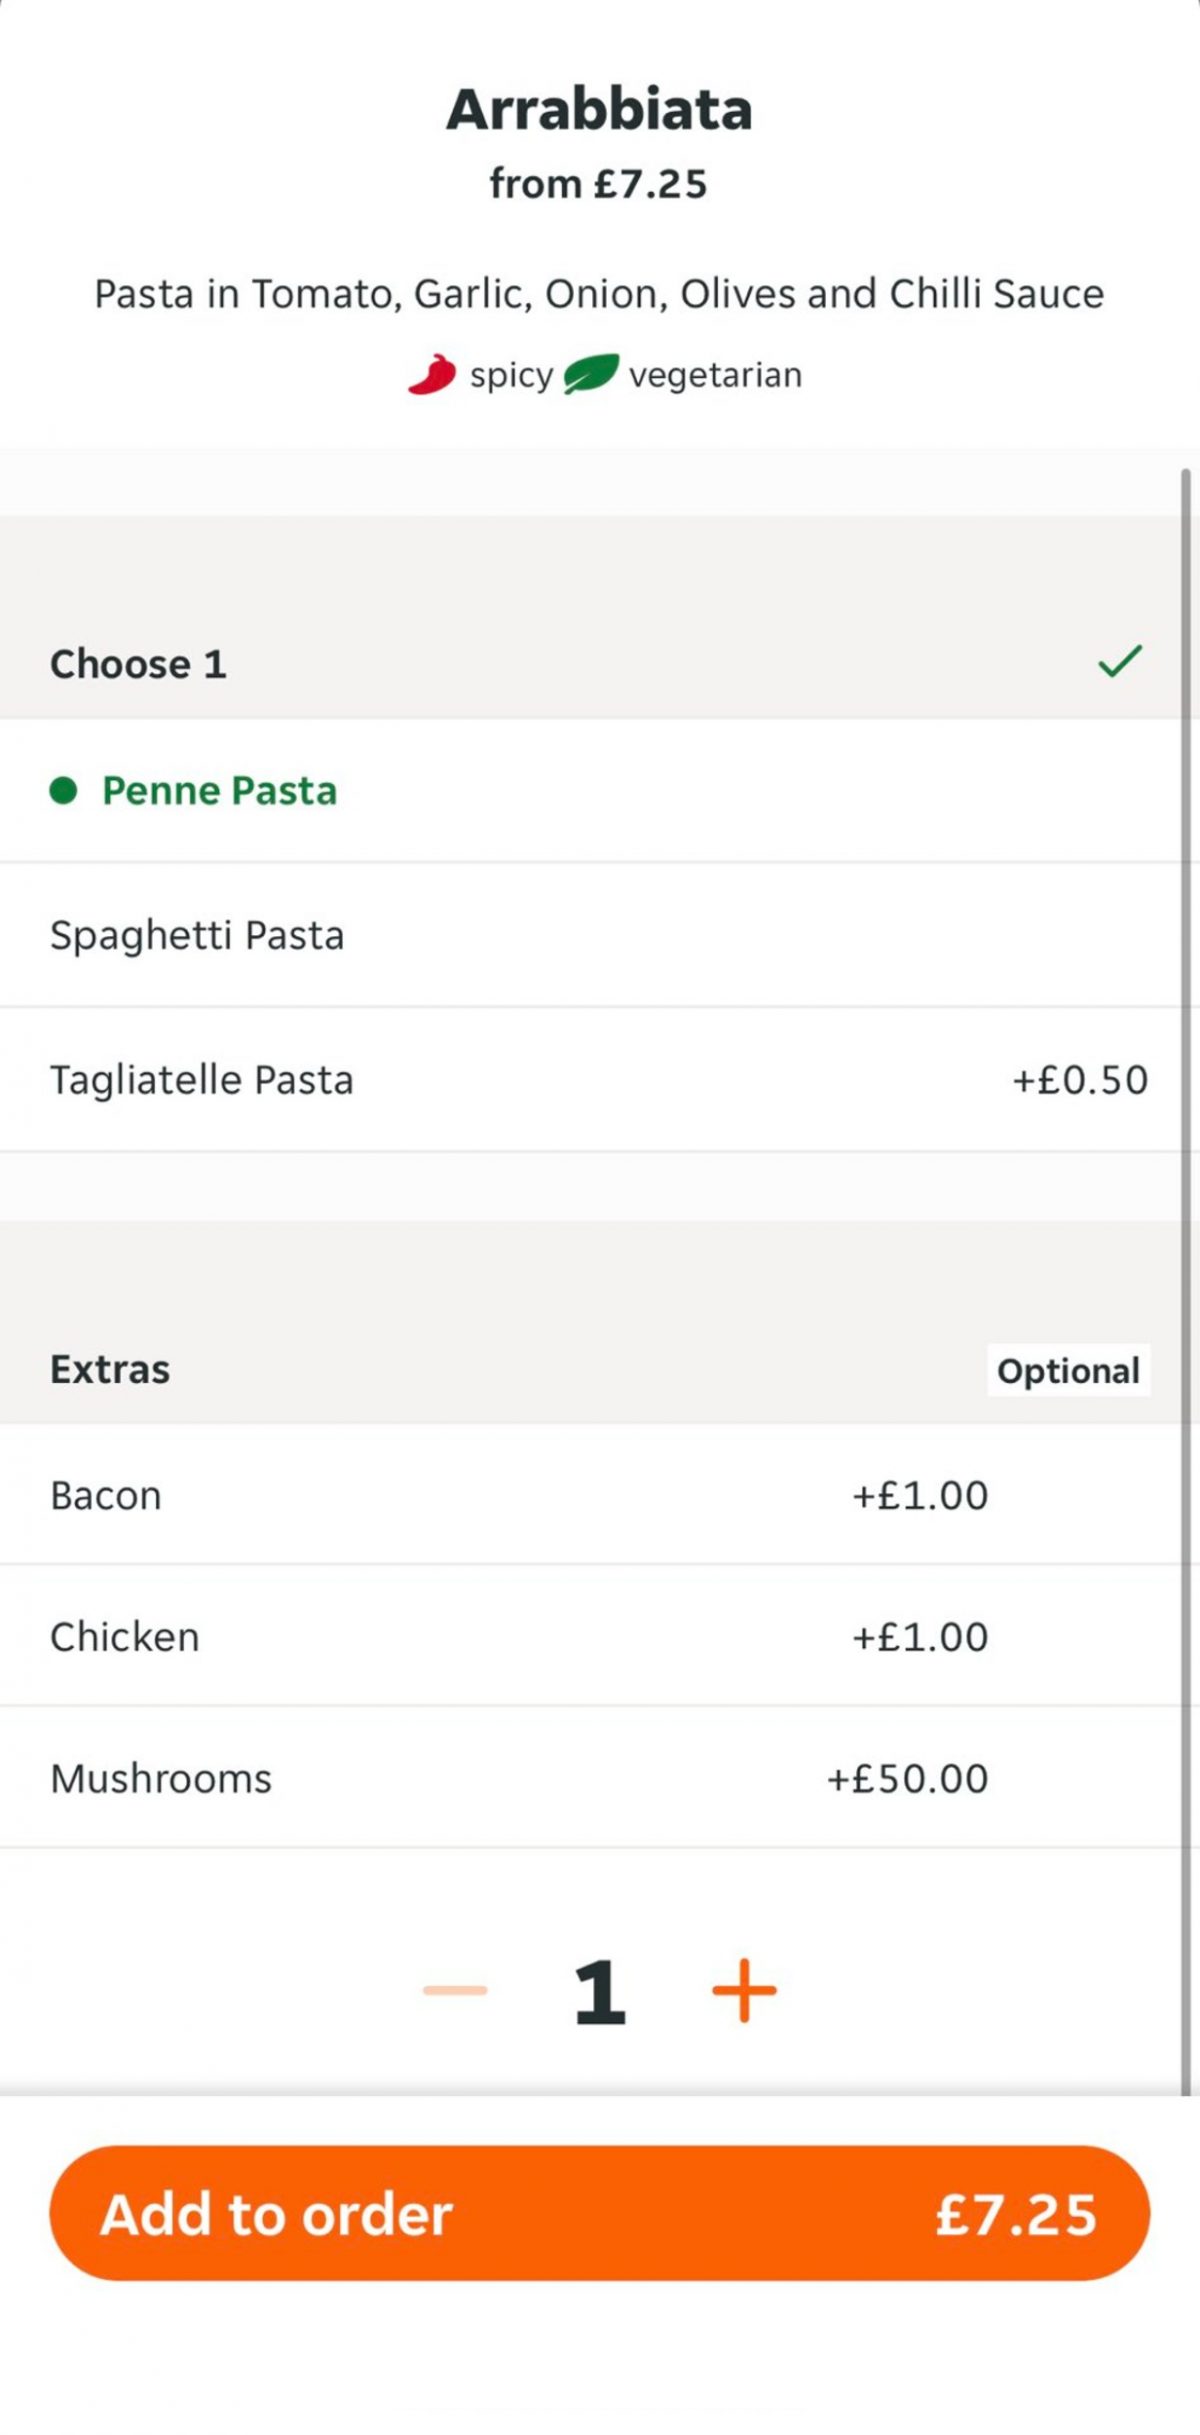 The Just Eat order